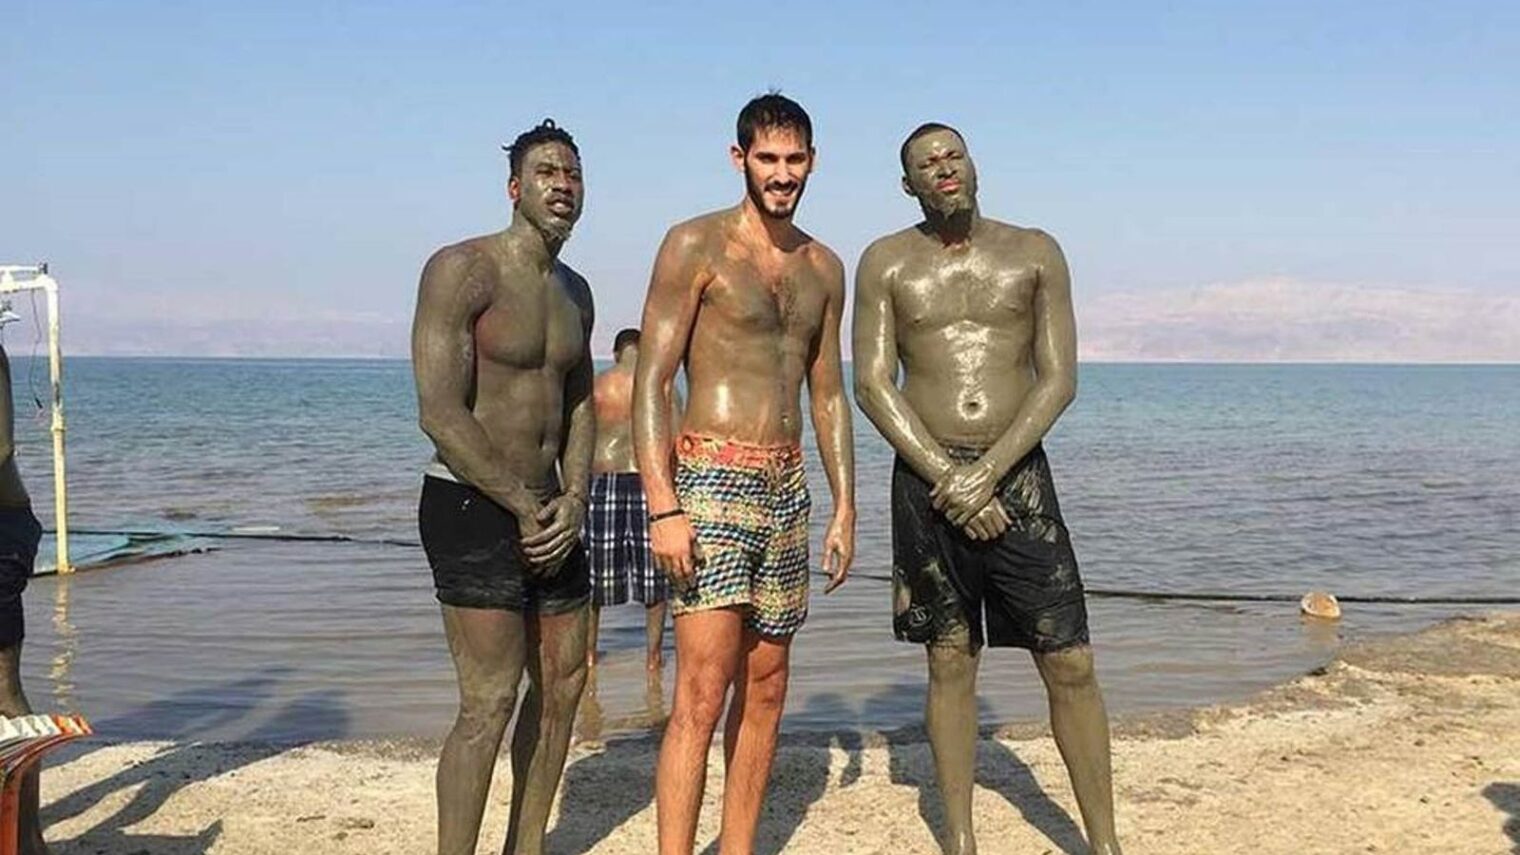 Kings forward Omri Casspi, center, at the Dead Sea with teammate DeMarcus Cousins, right, and Iman Shumpert of the Cavaliers. Photo courtesy of Kings.com